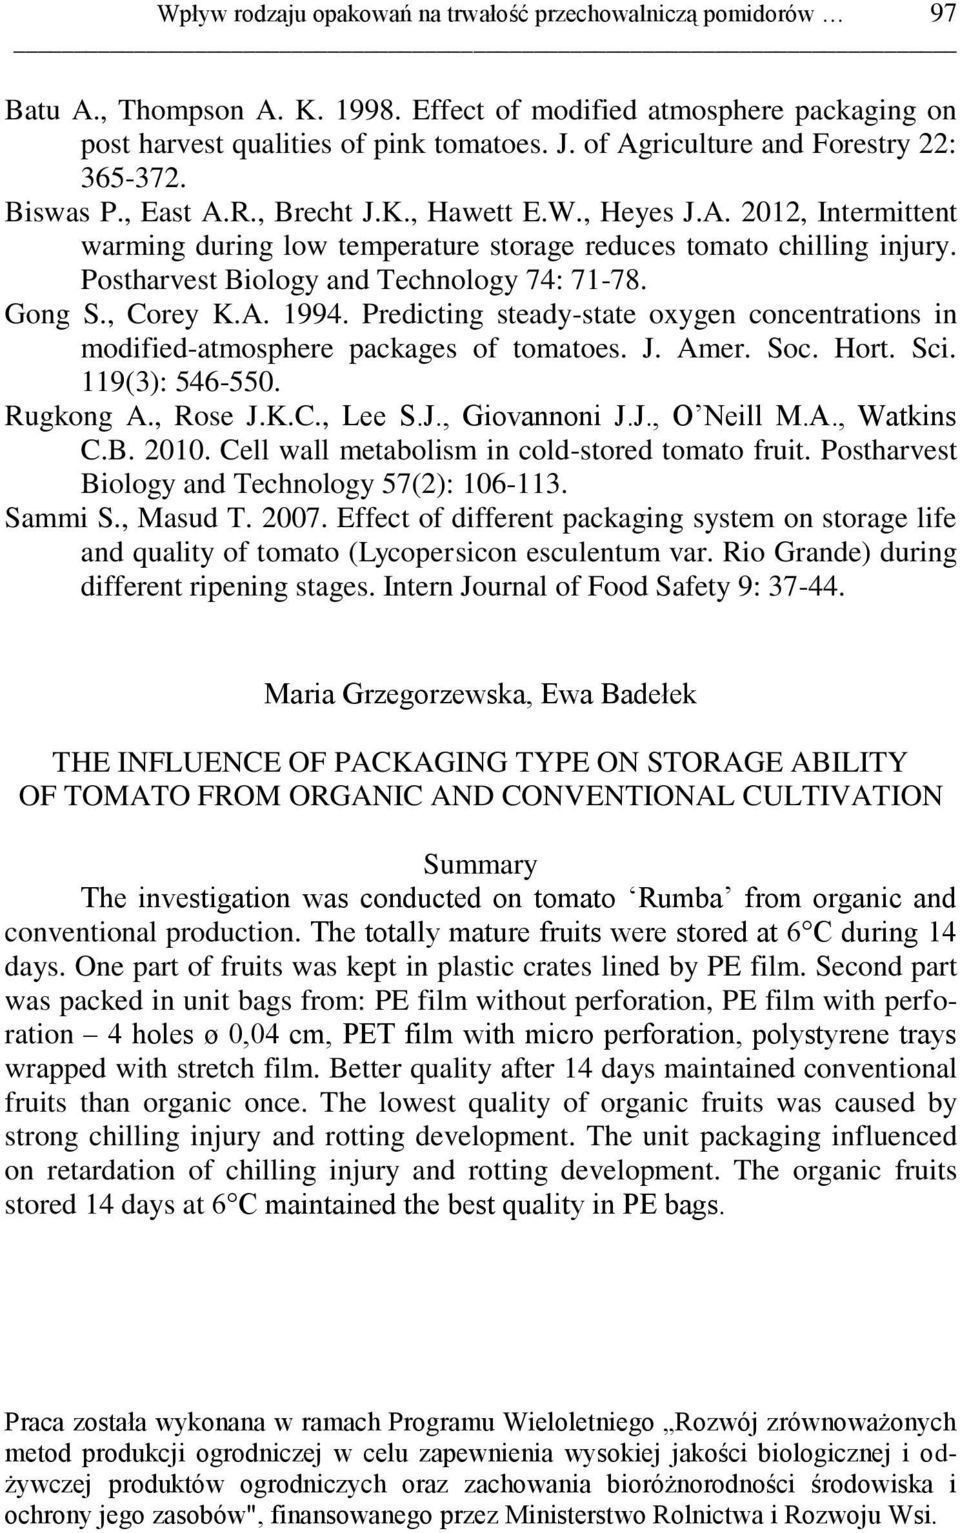 Postharvest Biology and Technology 7: 7-78. Gong S., Corey K.A. 99. Predicting steady-state oxygen concentrations in modified-atmosphere packages of tomatoes. J. Amer. Soc. Hort. Sci. 9(): 56-550.